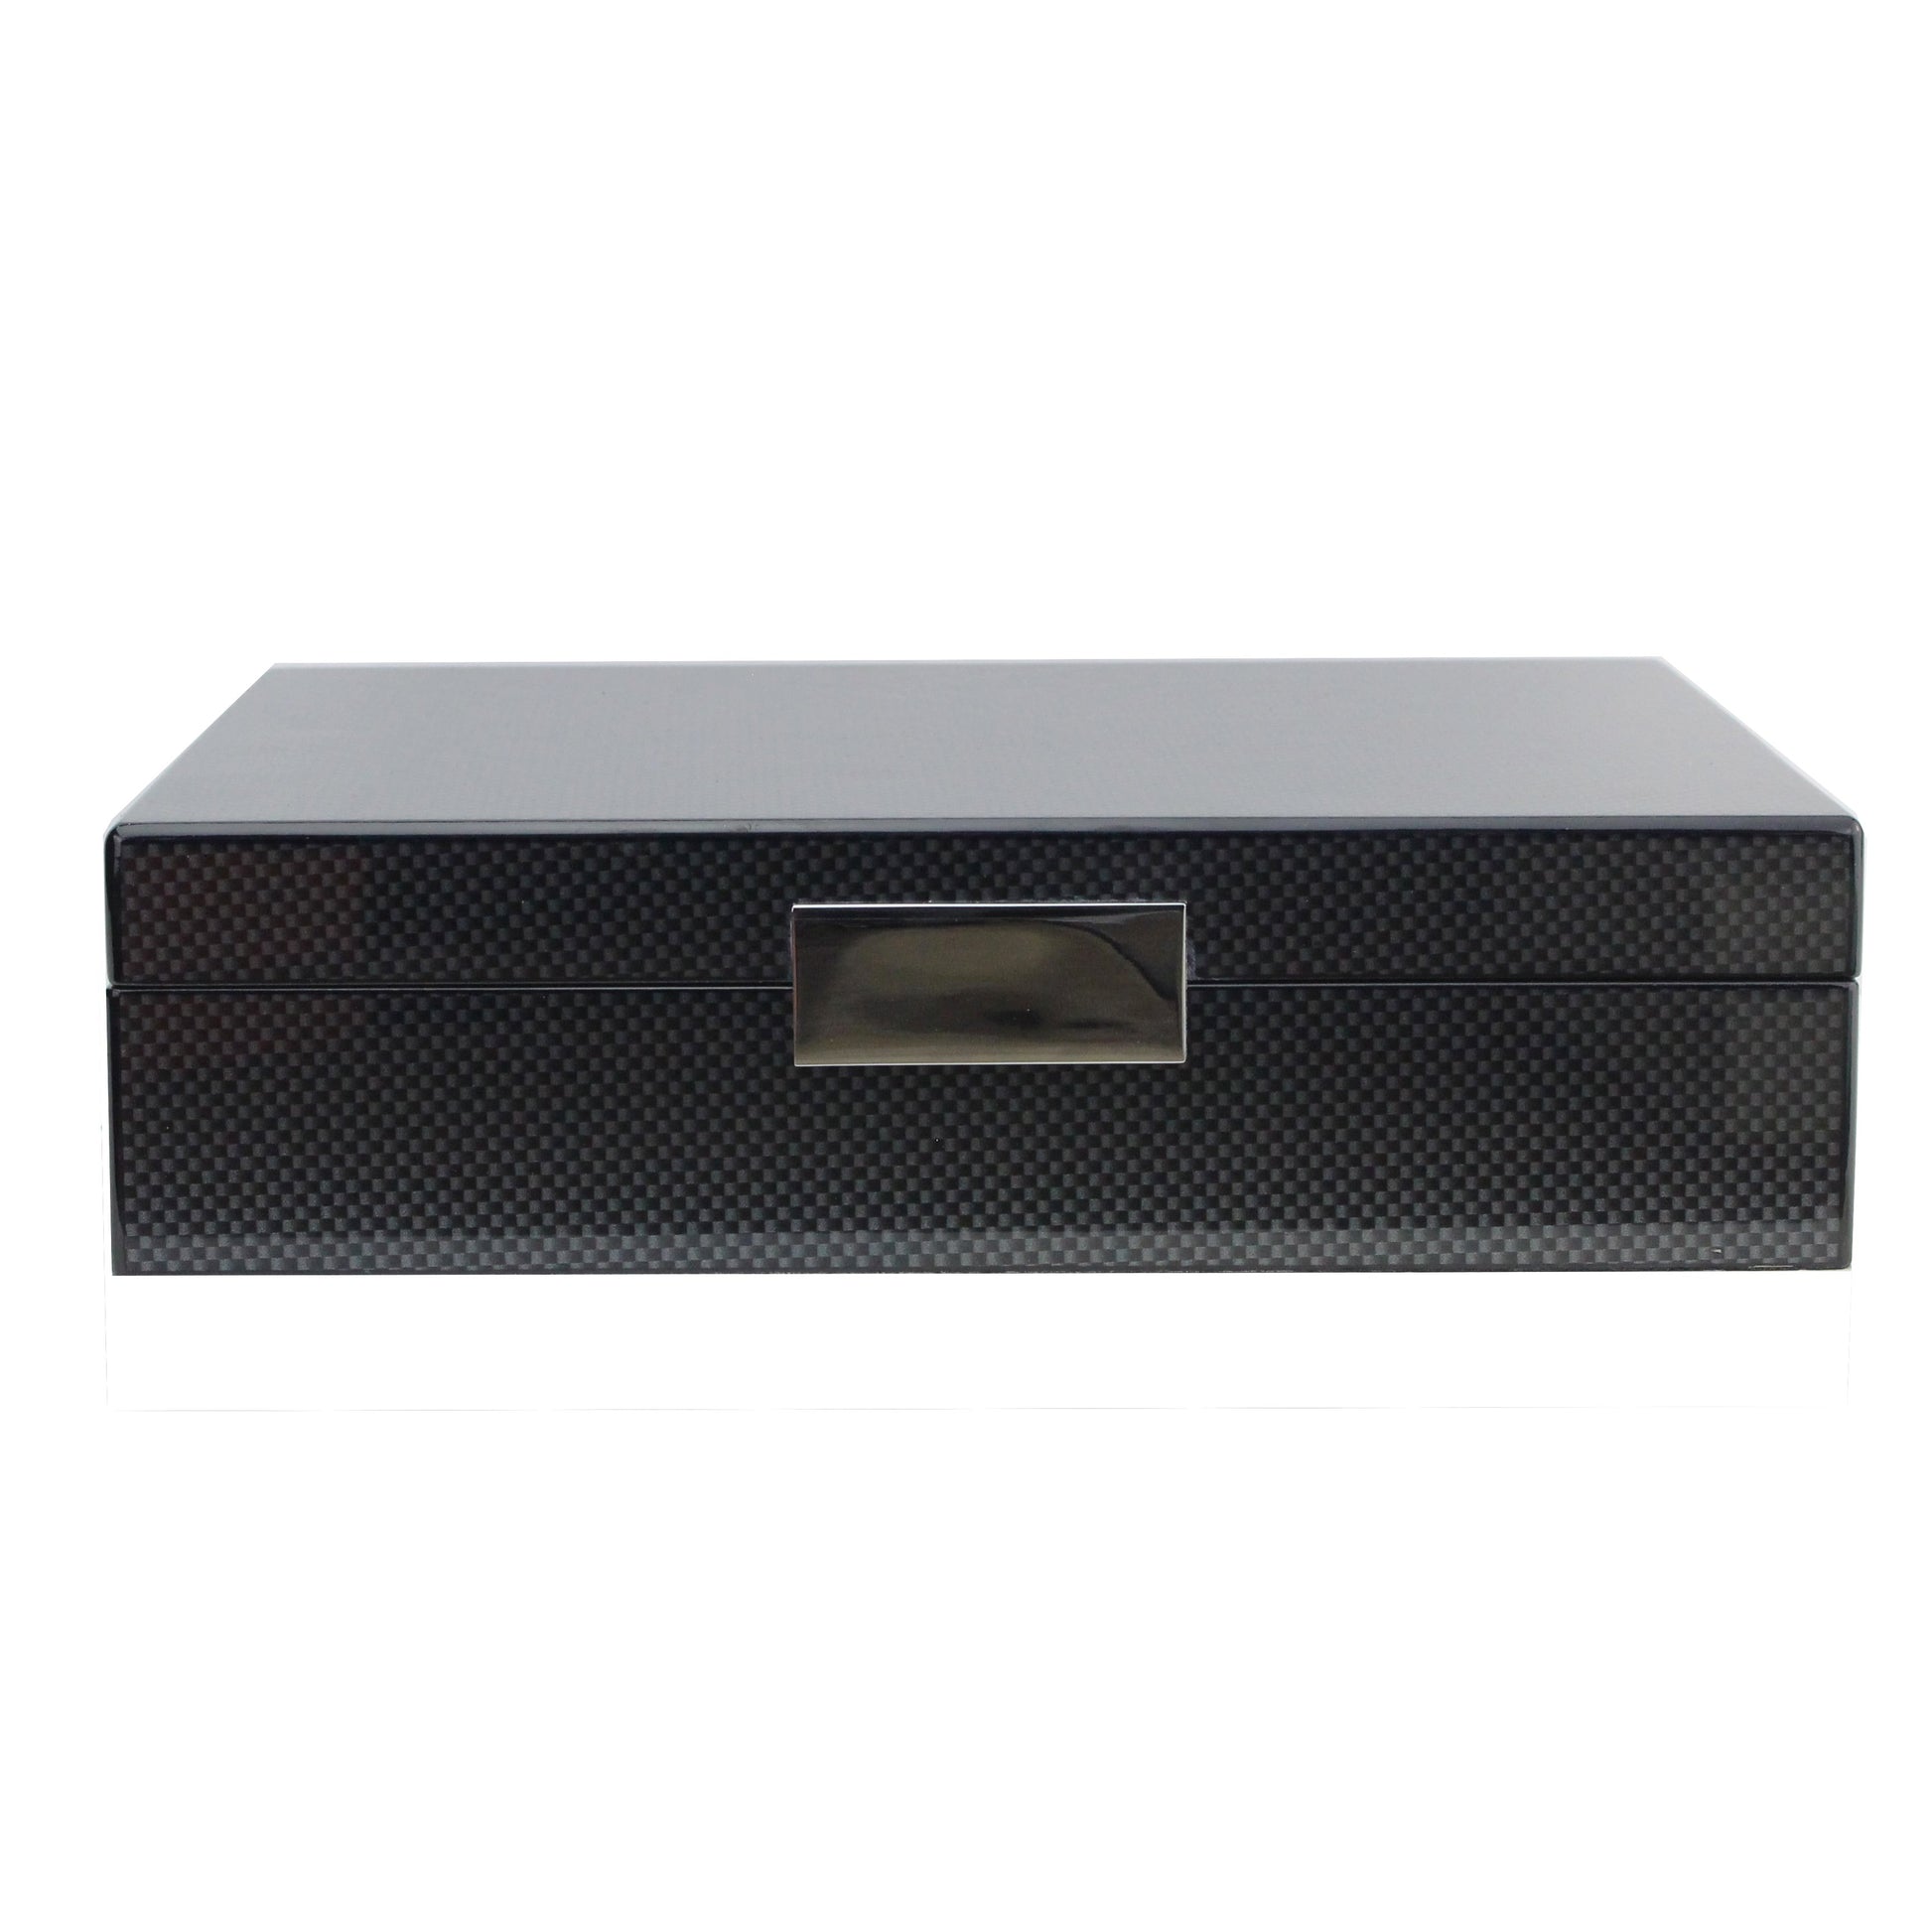 Large carbon fibre storage box with silver plated clasp